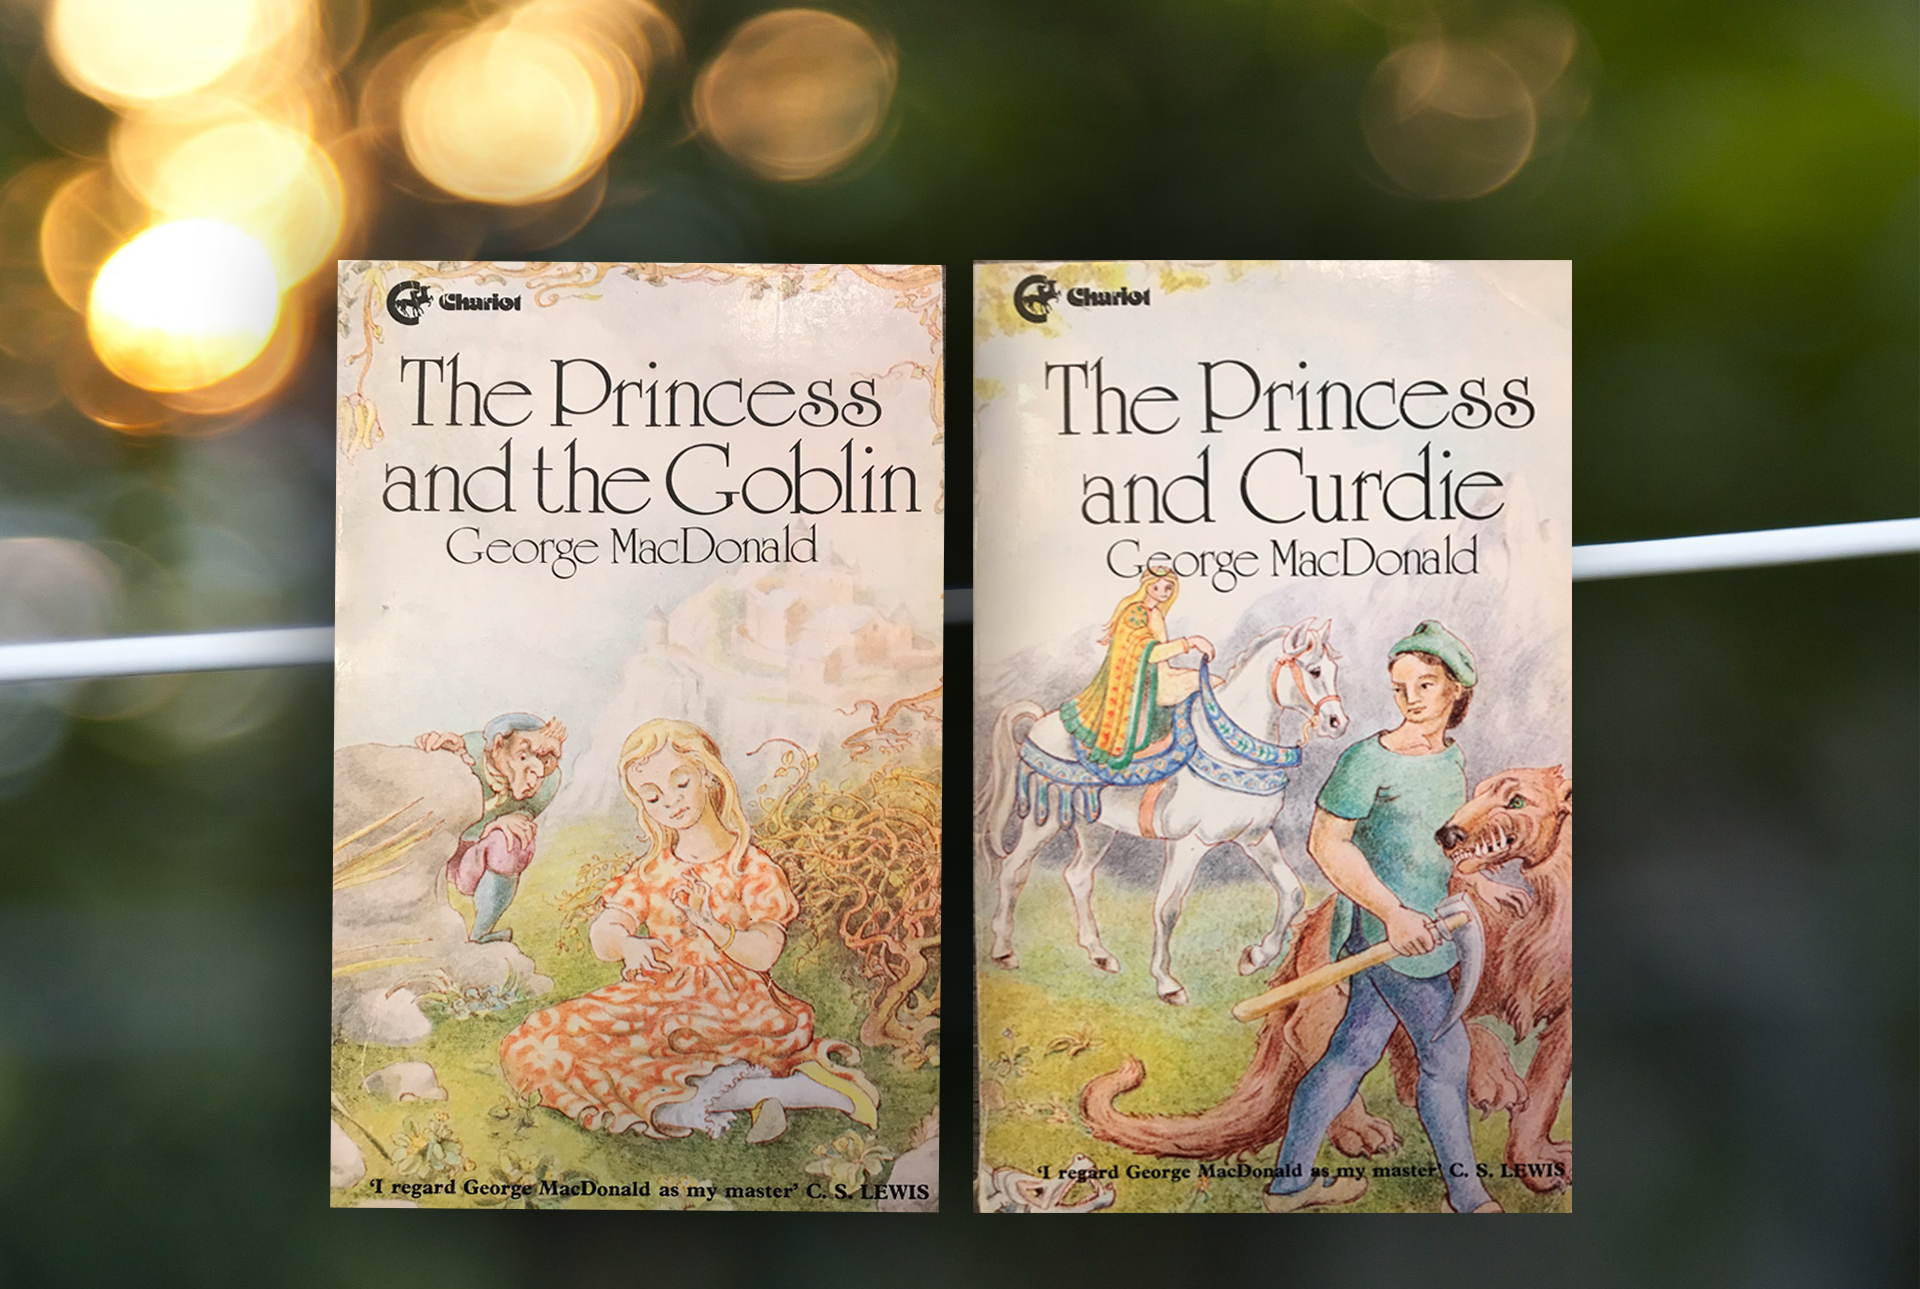 6 Great Reasons to Read The Princess and Curdie by George MacDonald